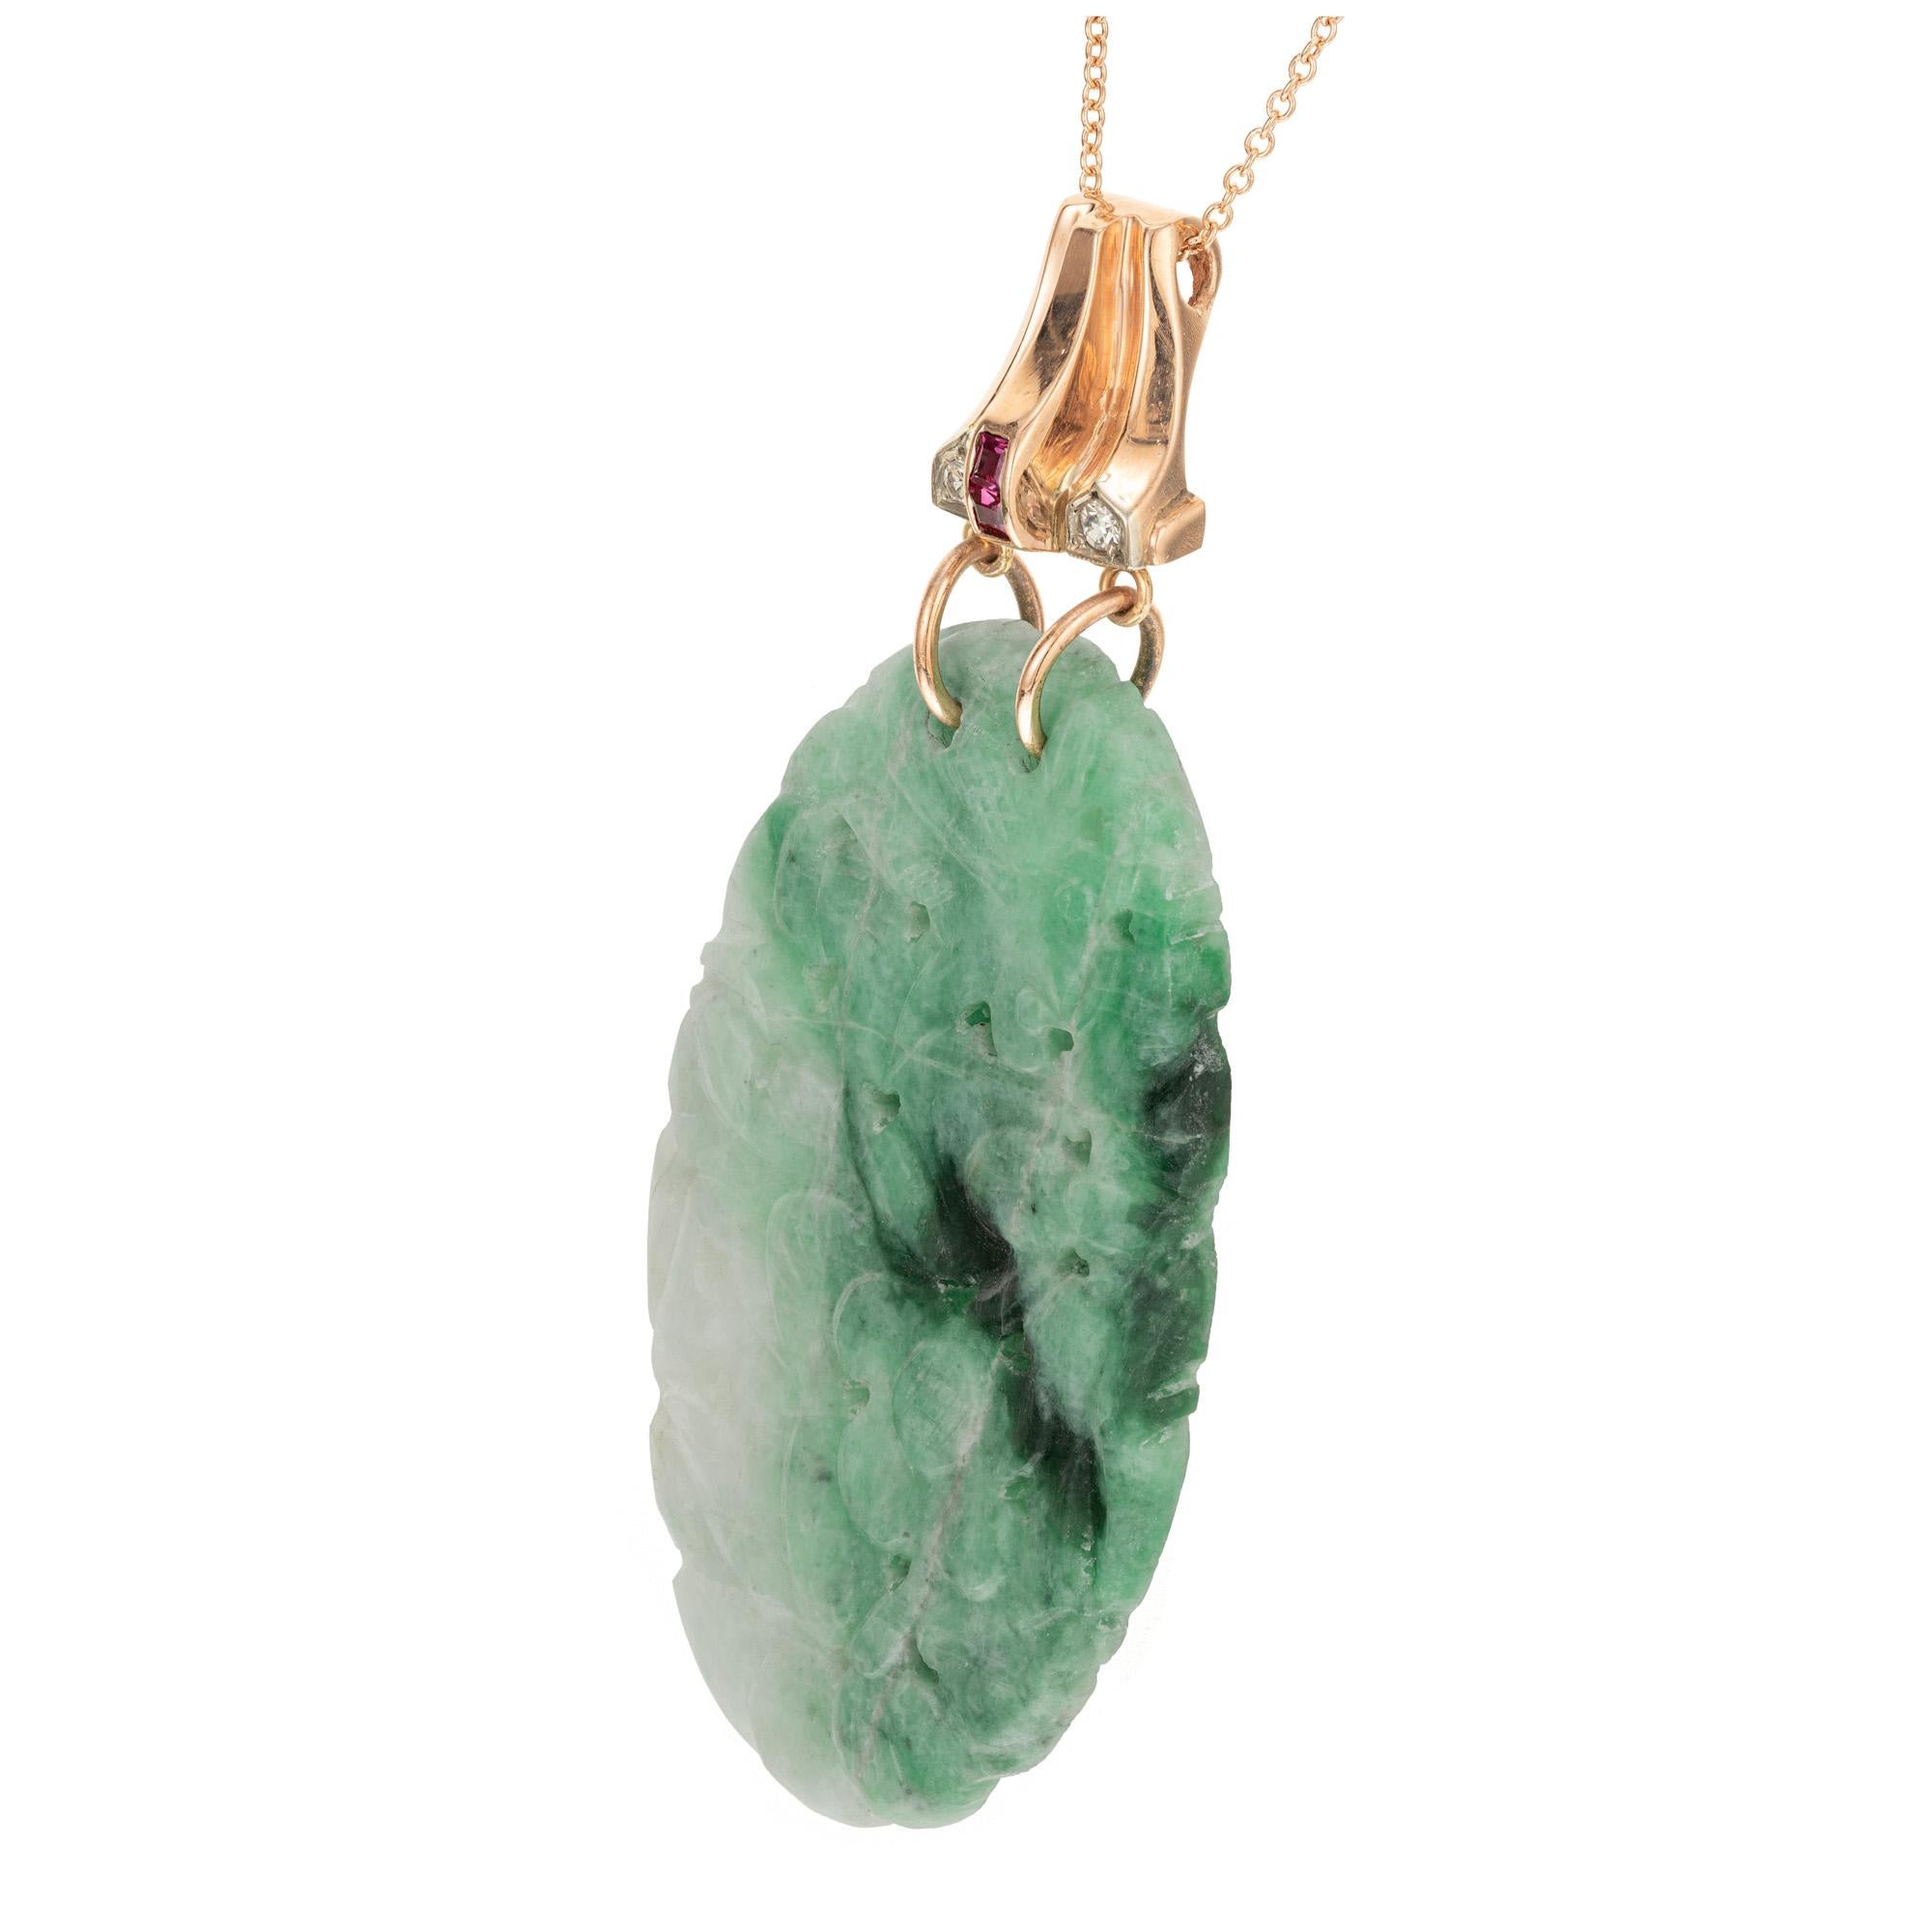 GIA Certified 43.79 Carat Jadeite Jade Ruby Diamond Pendant Necklace In Good Condition For Sale In Stamford, CT